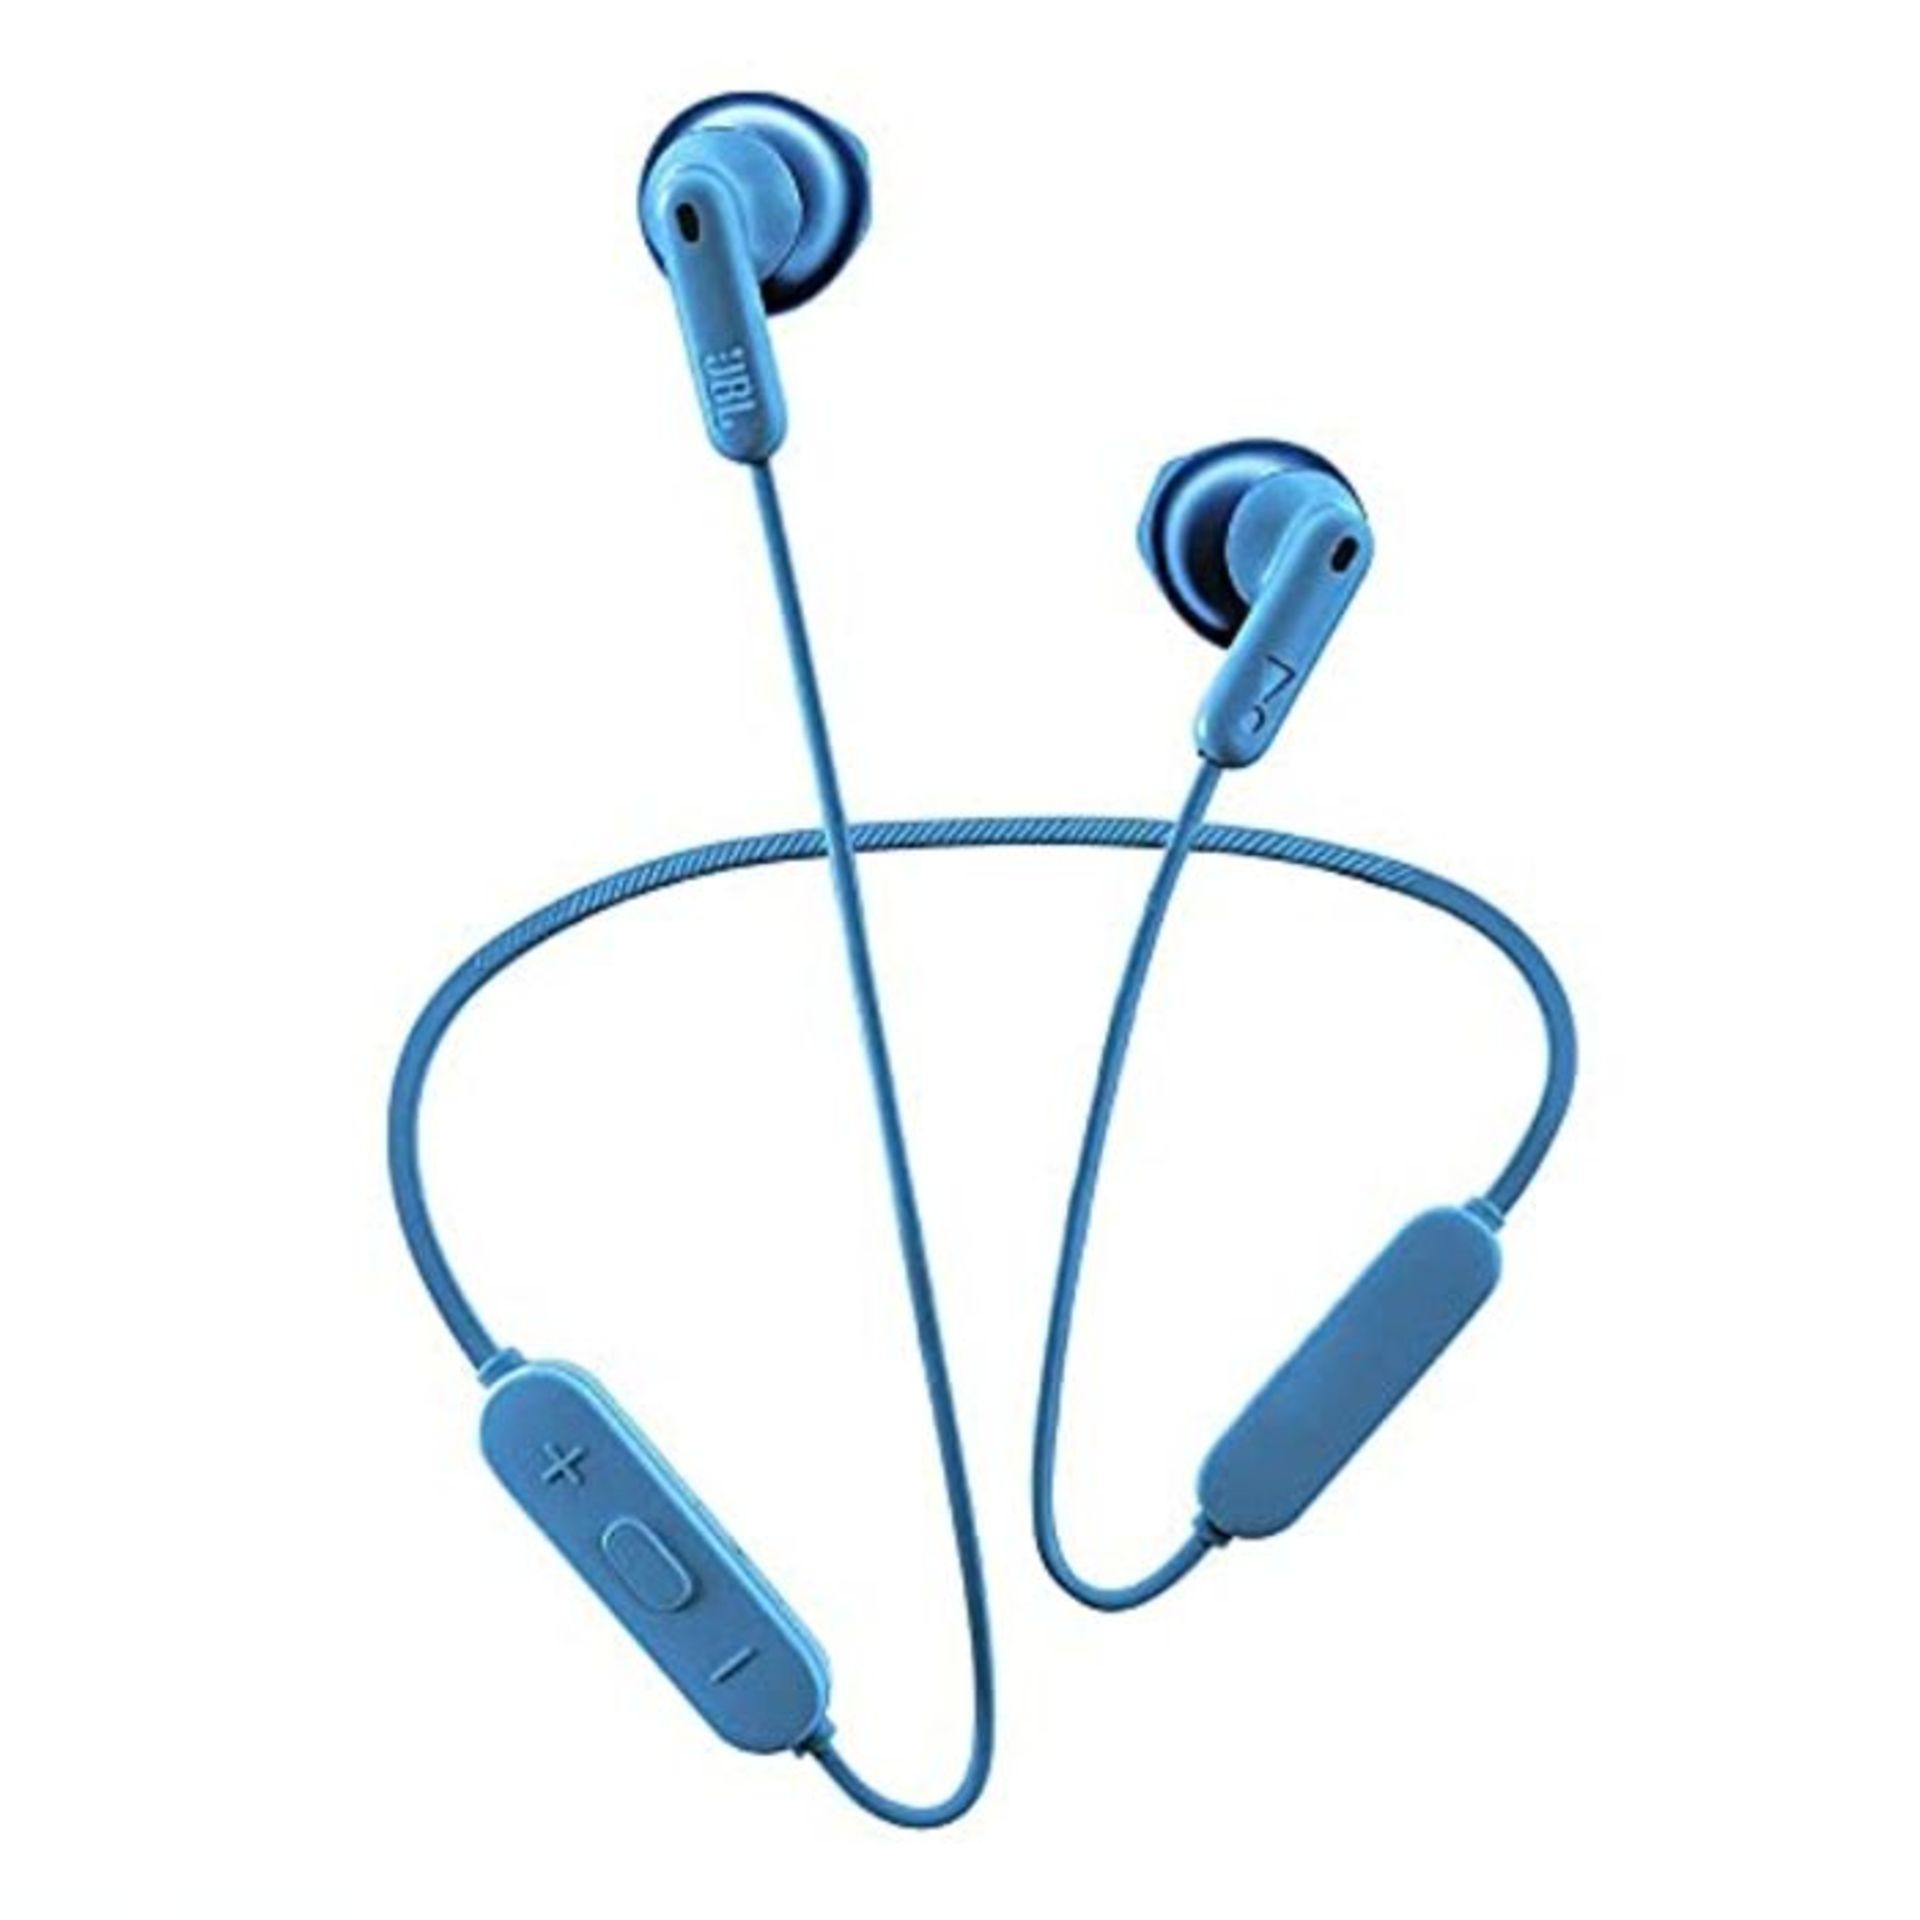 JBL TUNE 215BT - Wireless earbud headphones with Bluetooth 5.0, built-in microphone, a